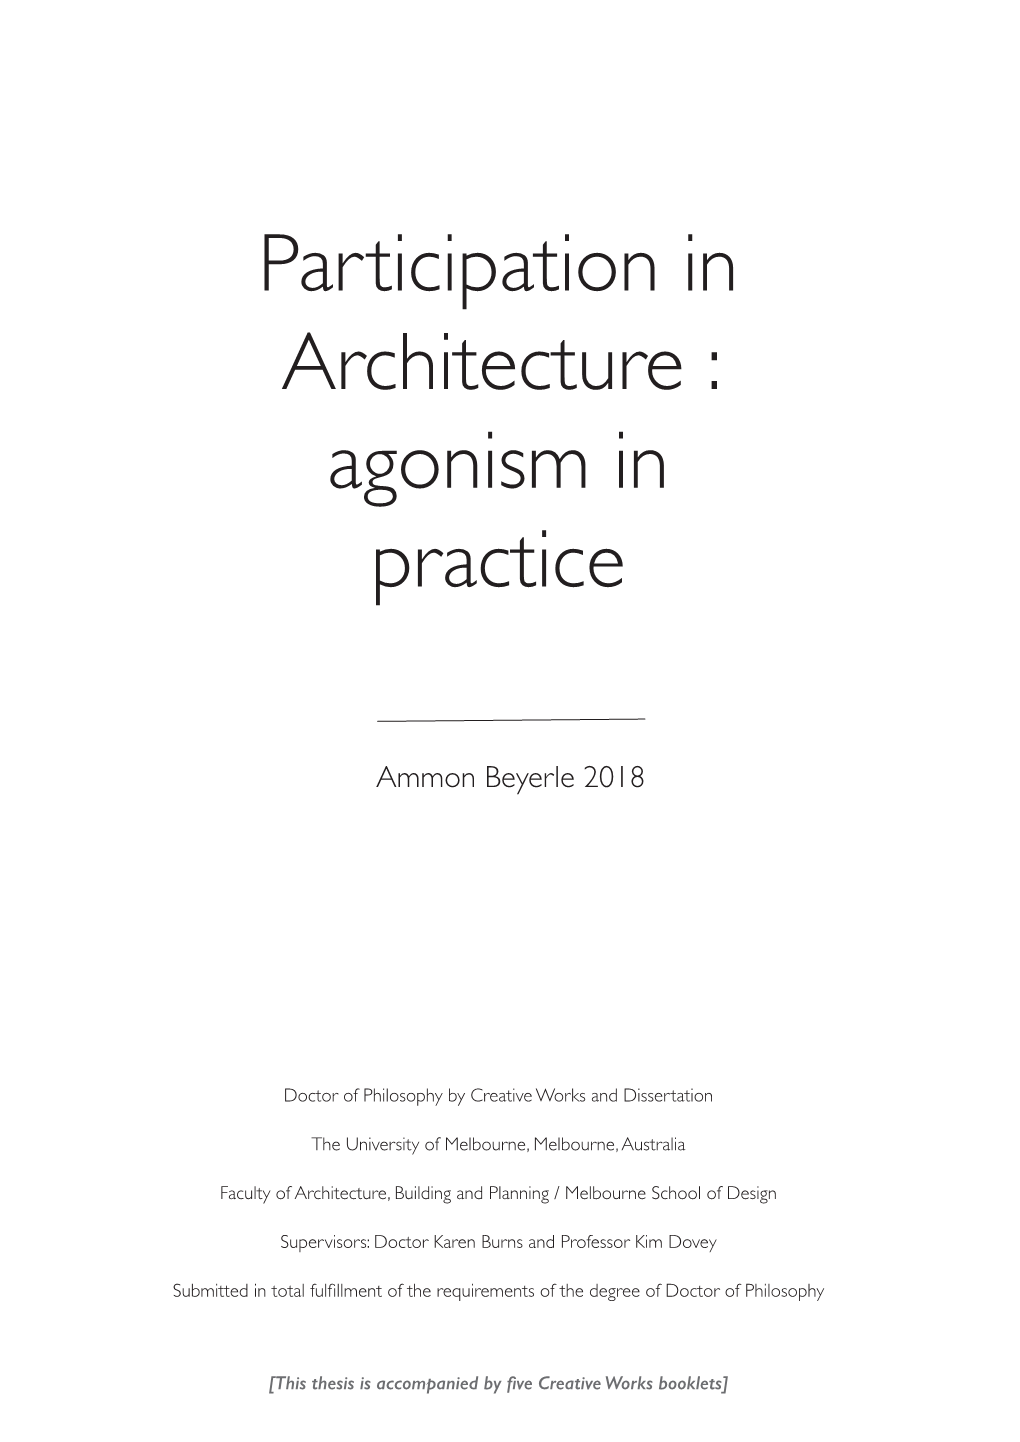 Participation in Architecture : Agonism in Practice